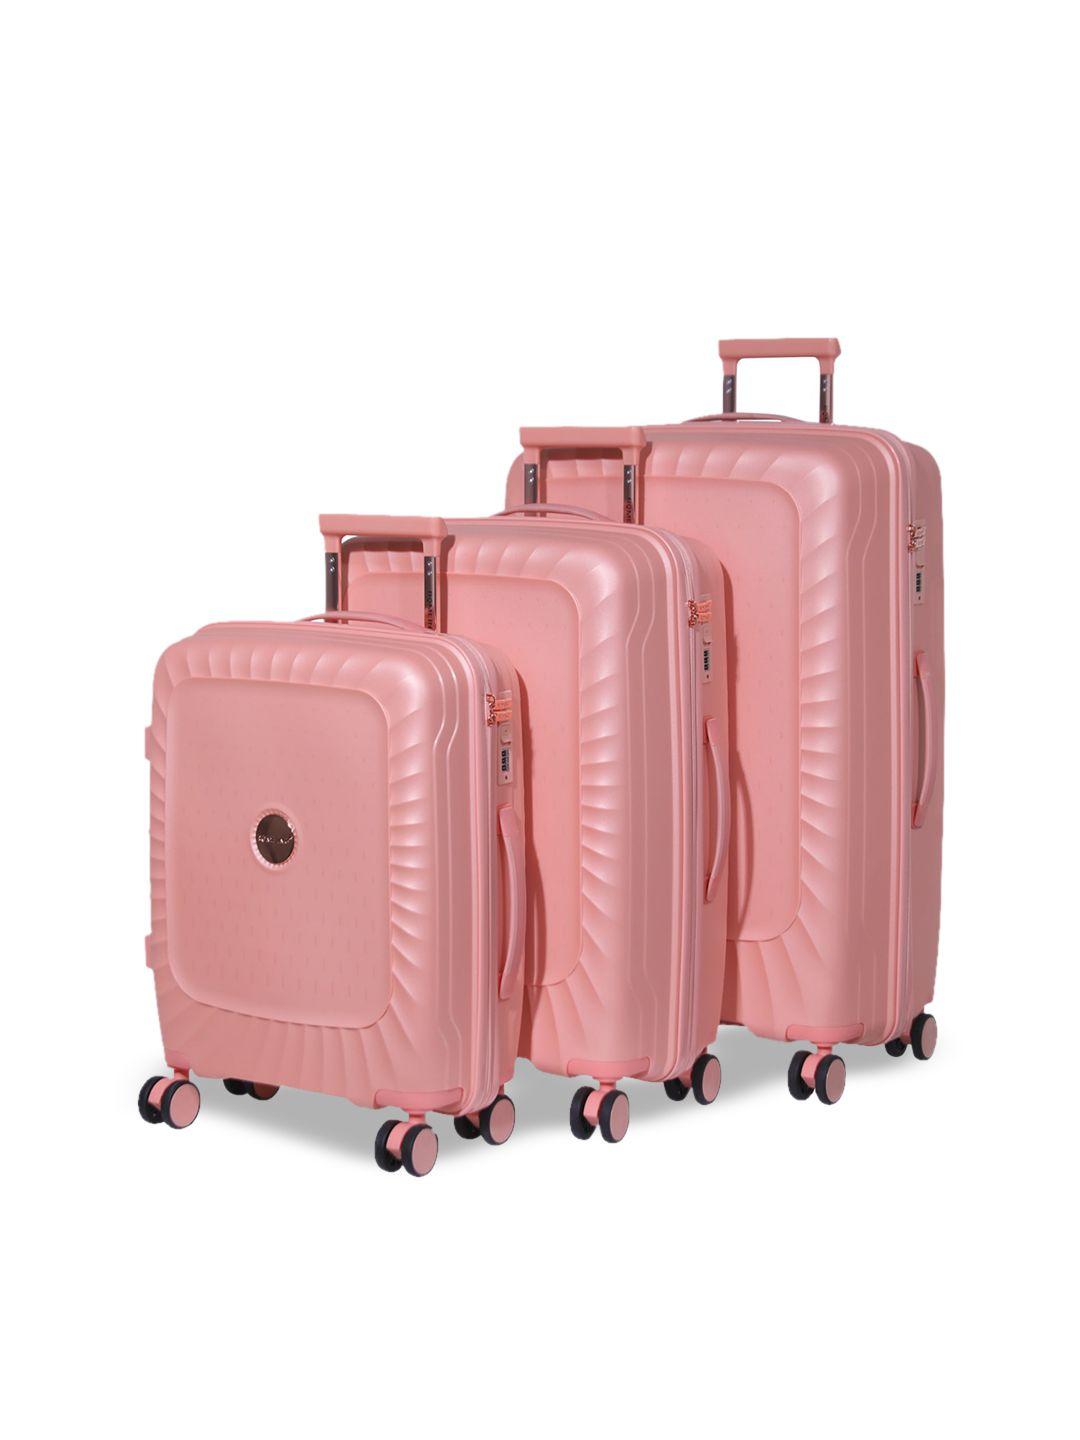 romeing set of 3 textured hard-sided trolley suitcases